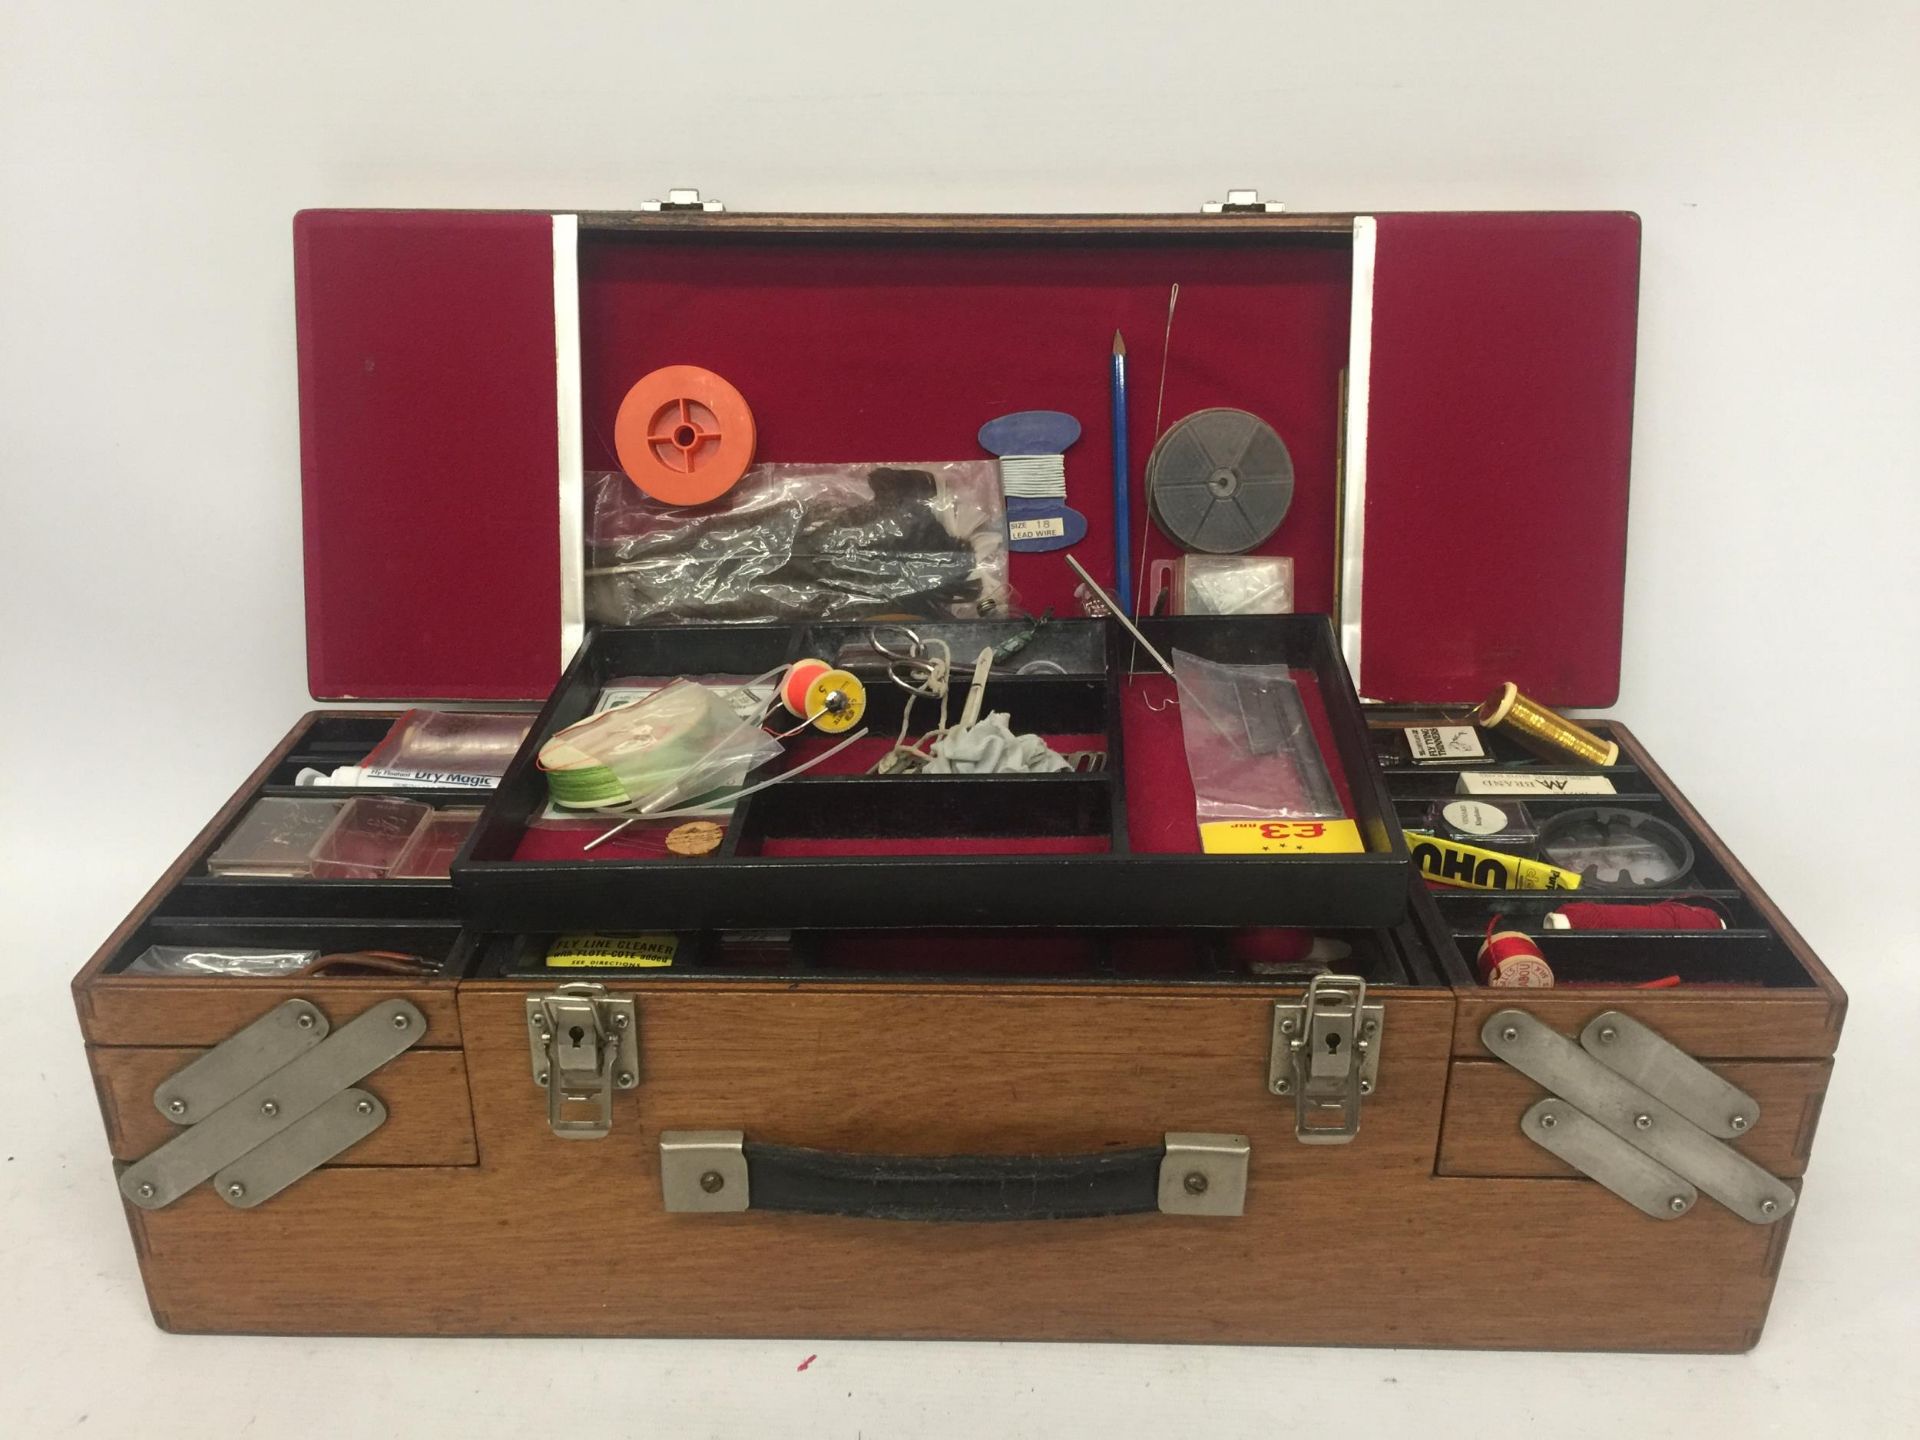 A FLY FISHING FLY TYERS BOX AND CONTENTS WITH TWO INTERNAL TRAY COMPARTMENTS AND EQUIPMENT